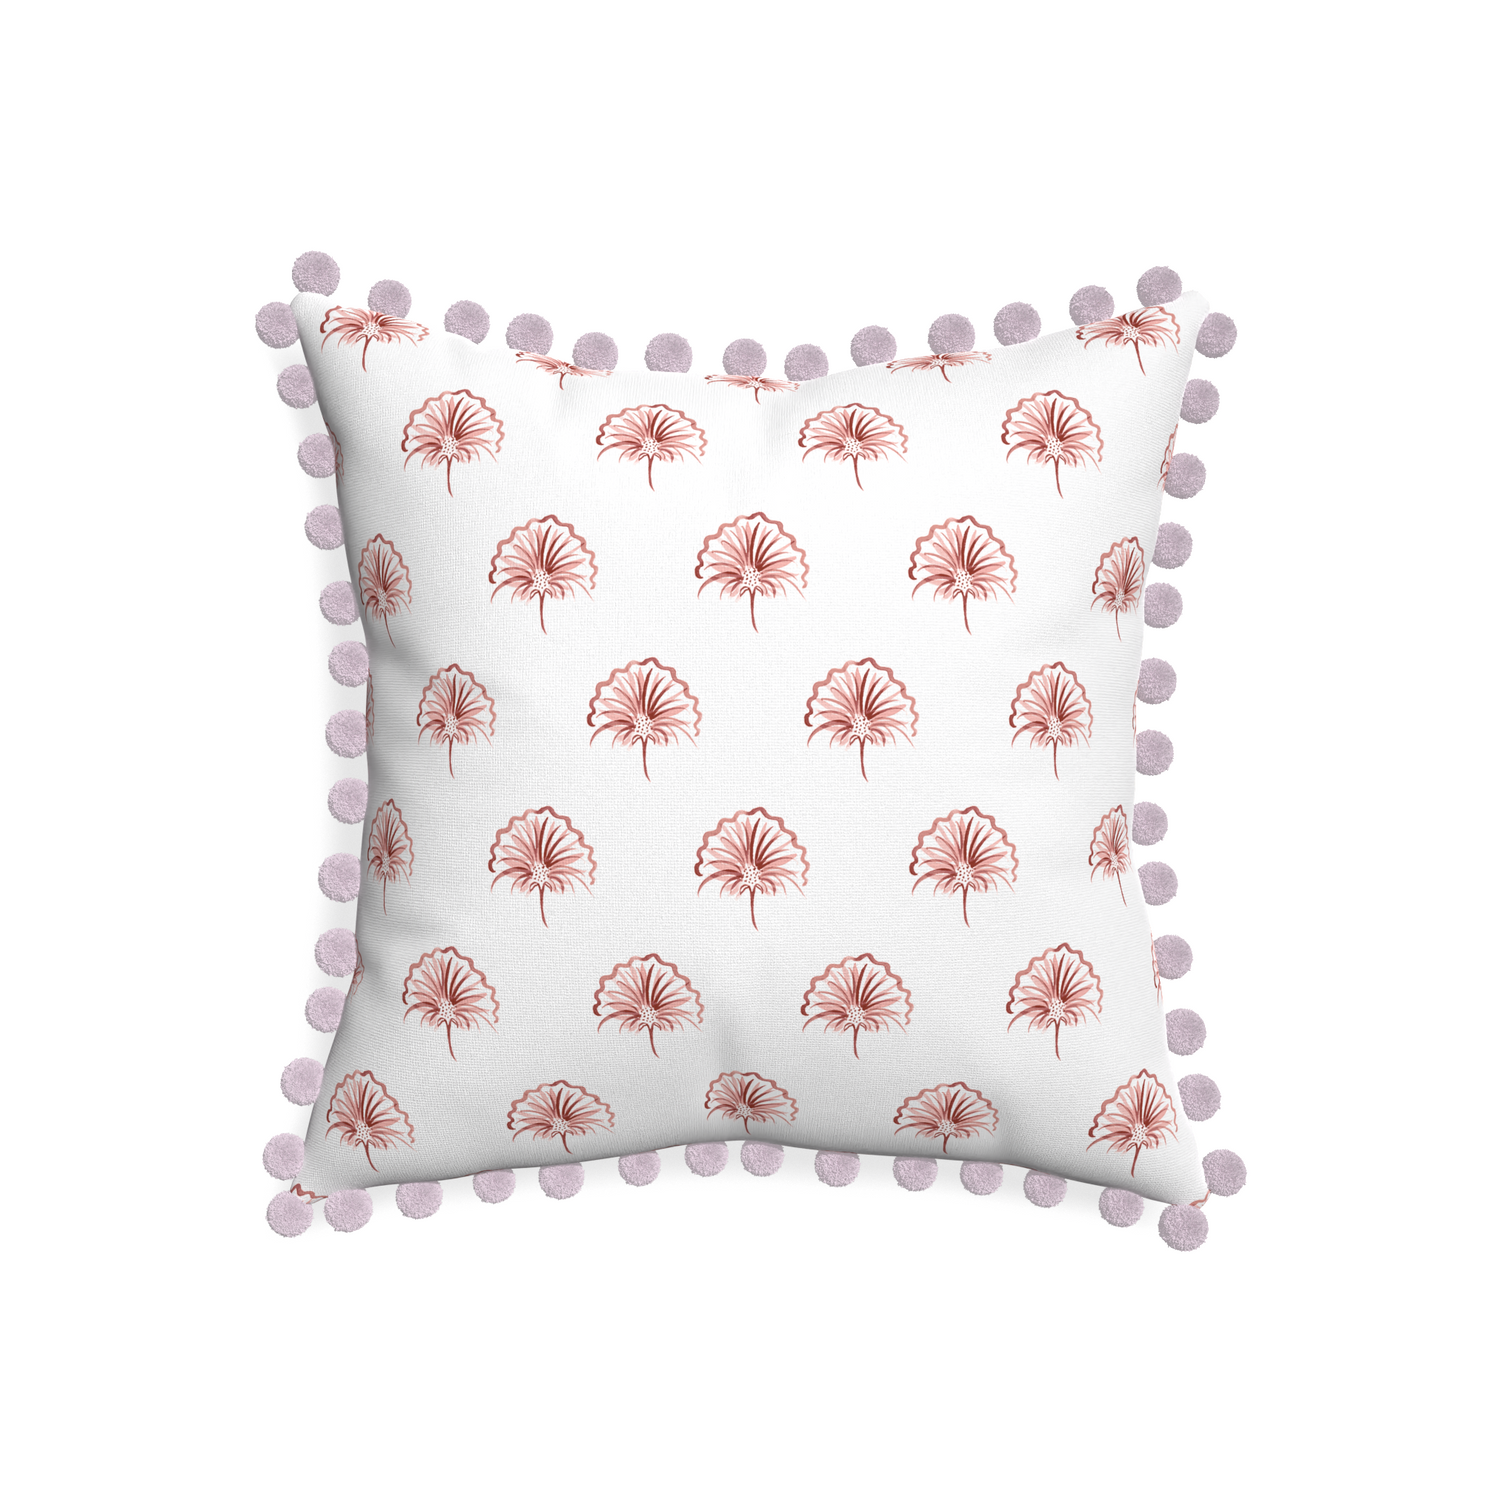 20-square penelope rose custom floral pinkpillow with l on white background